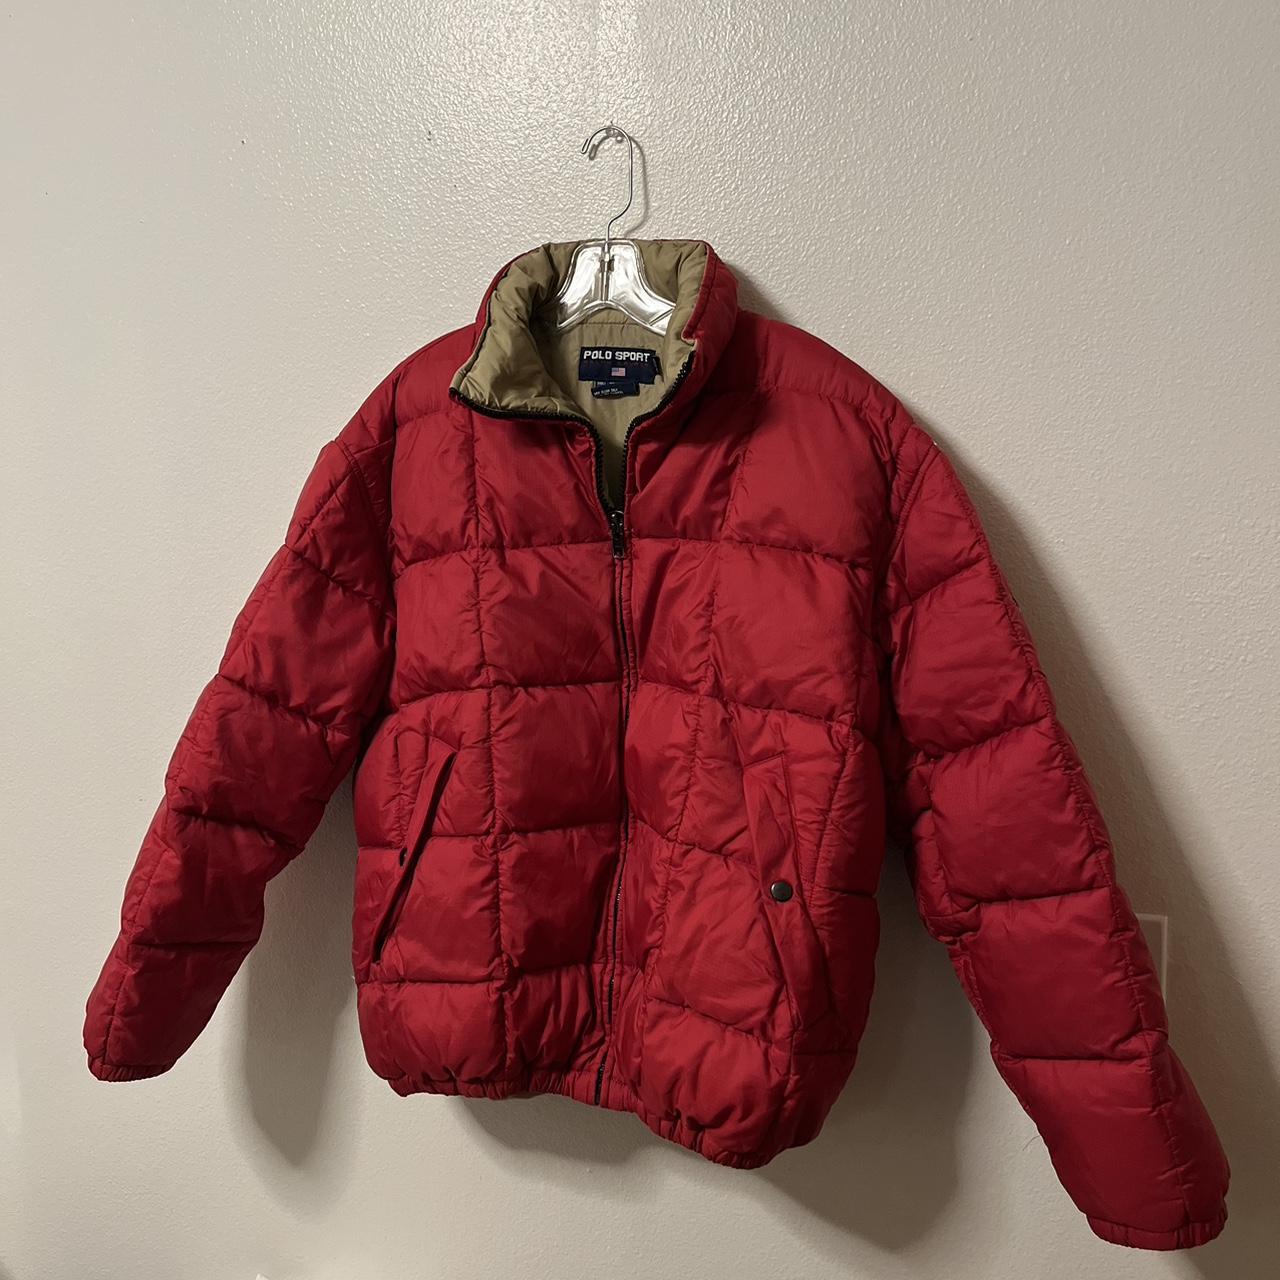 2000s Polo Sport puffer jacket Red🔴 Size... - Depop